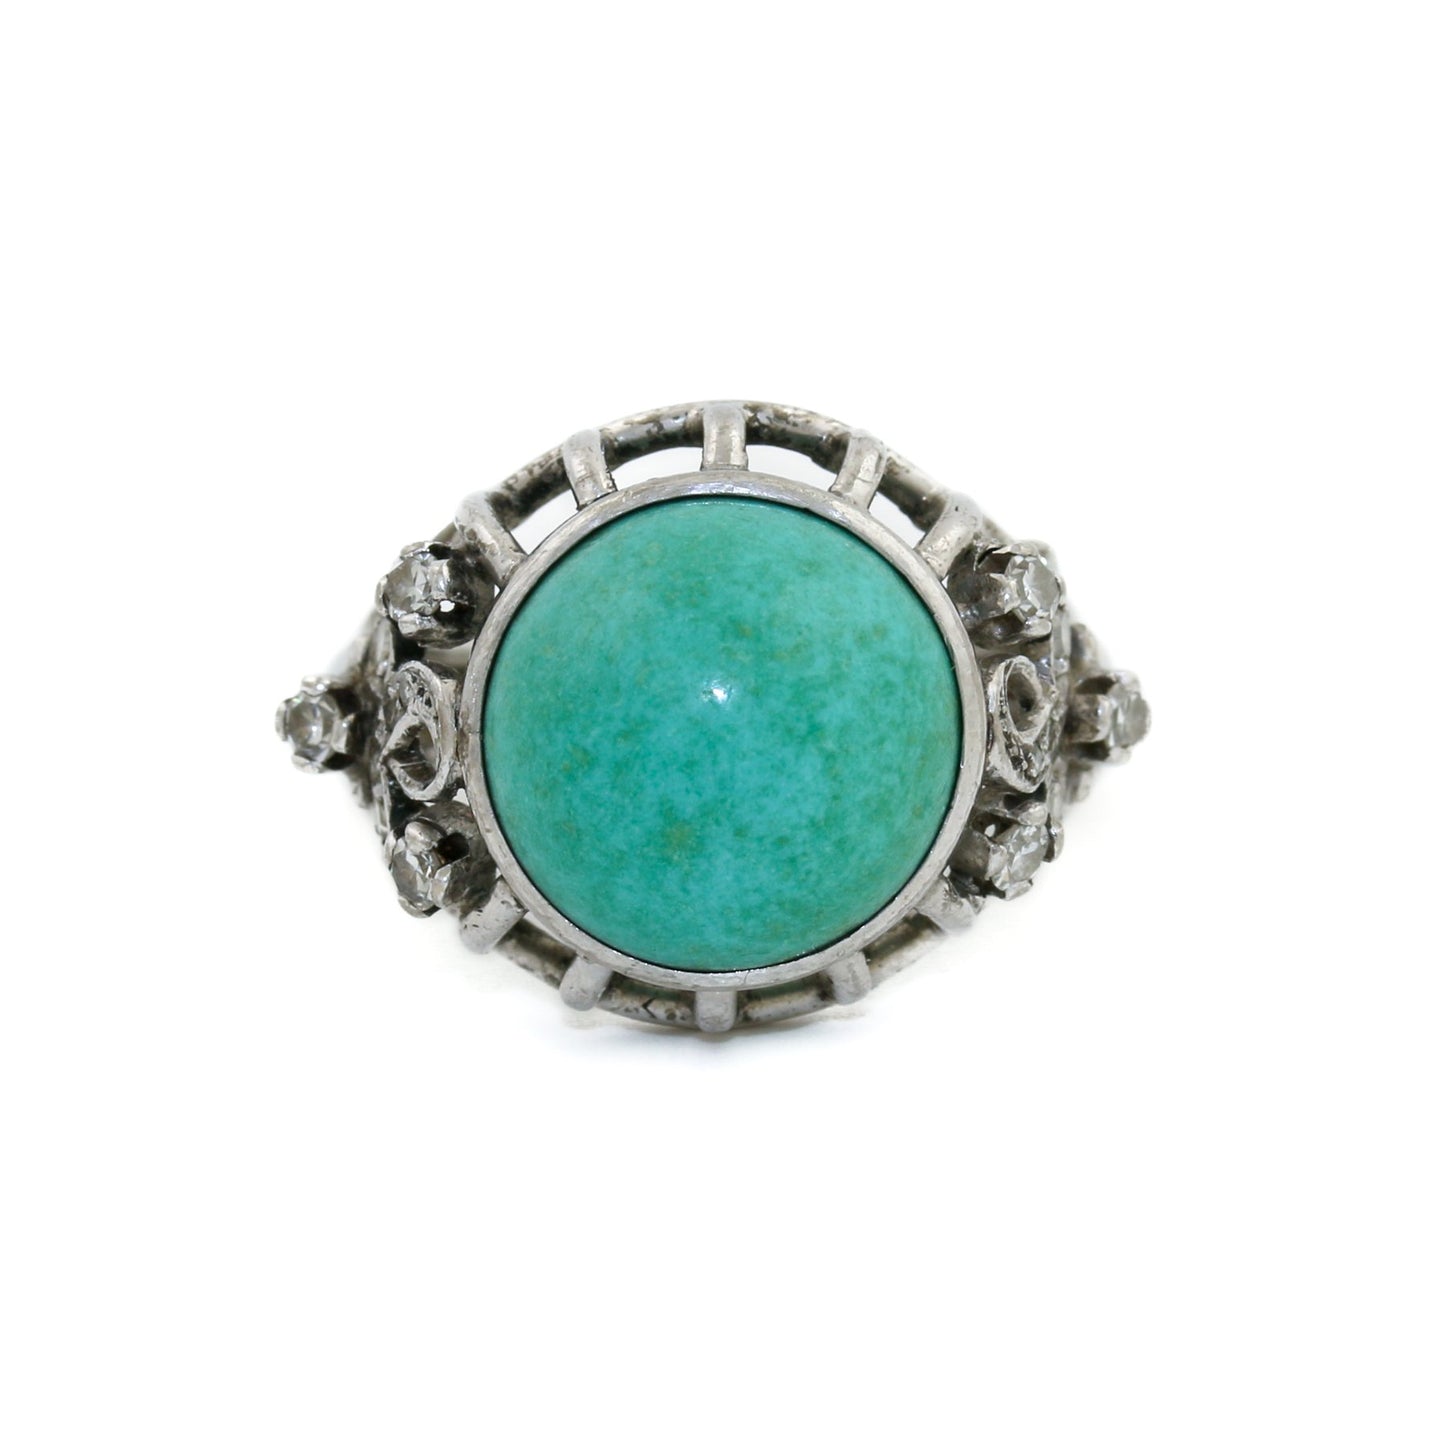 14 k White Gold x Turquoise & Diamond Caged Cocktail Ring - Kingdom Jewelry